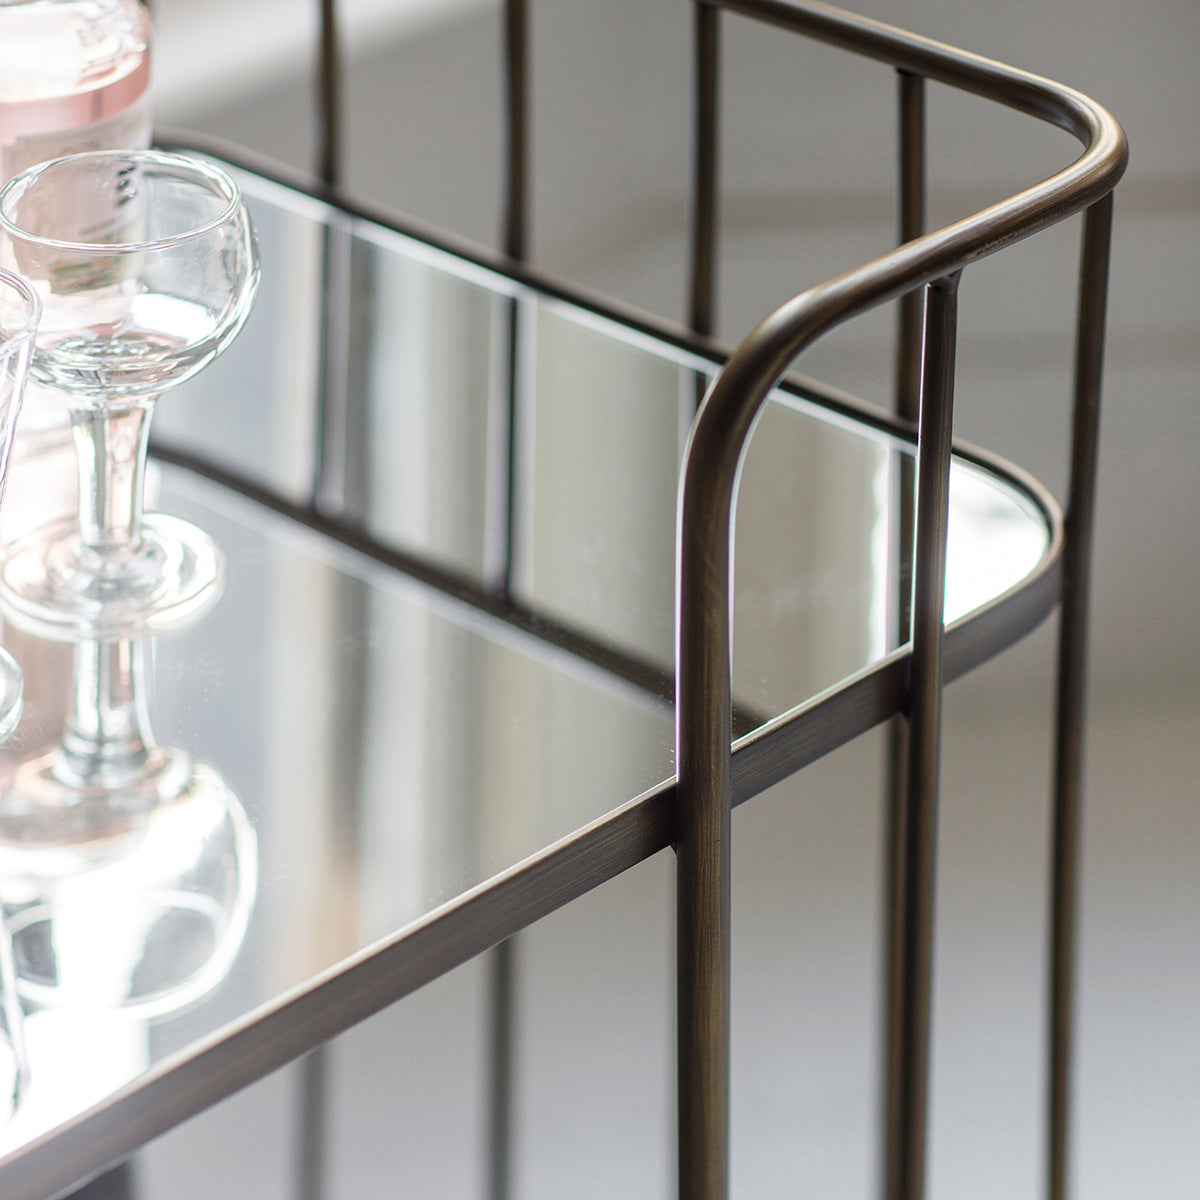 A bronze Verna drinks trolley with wine glasses, perfect for interior decor or home furniture.